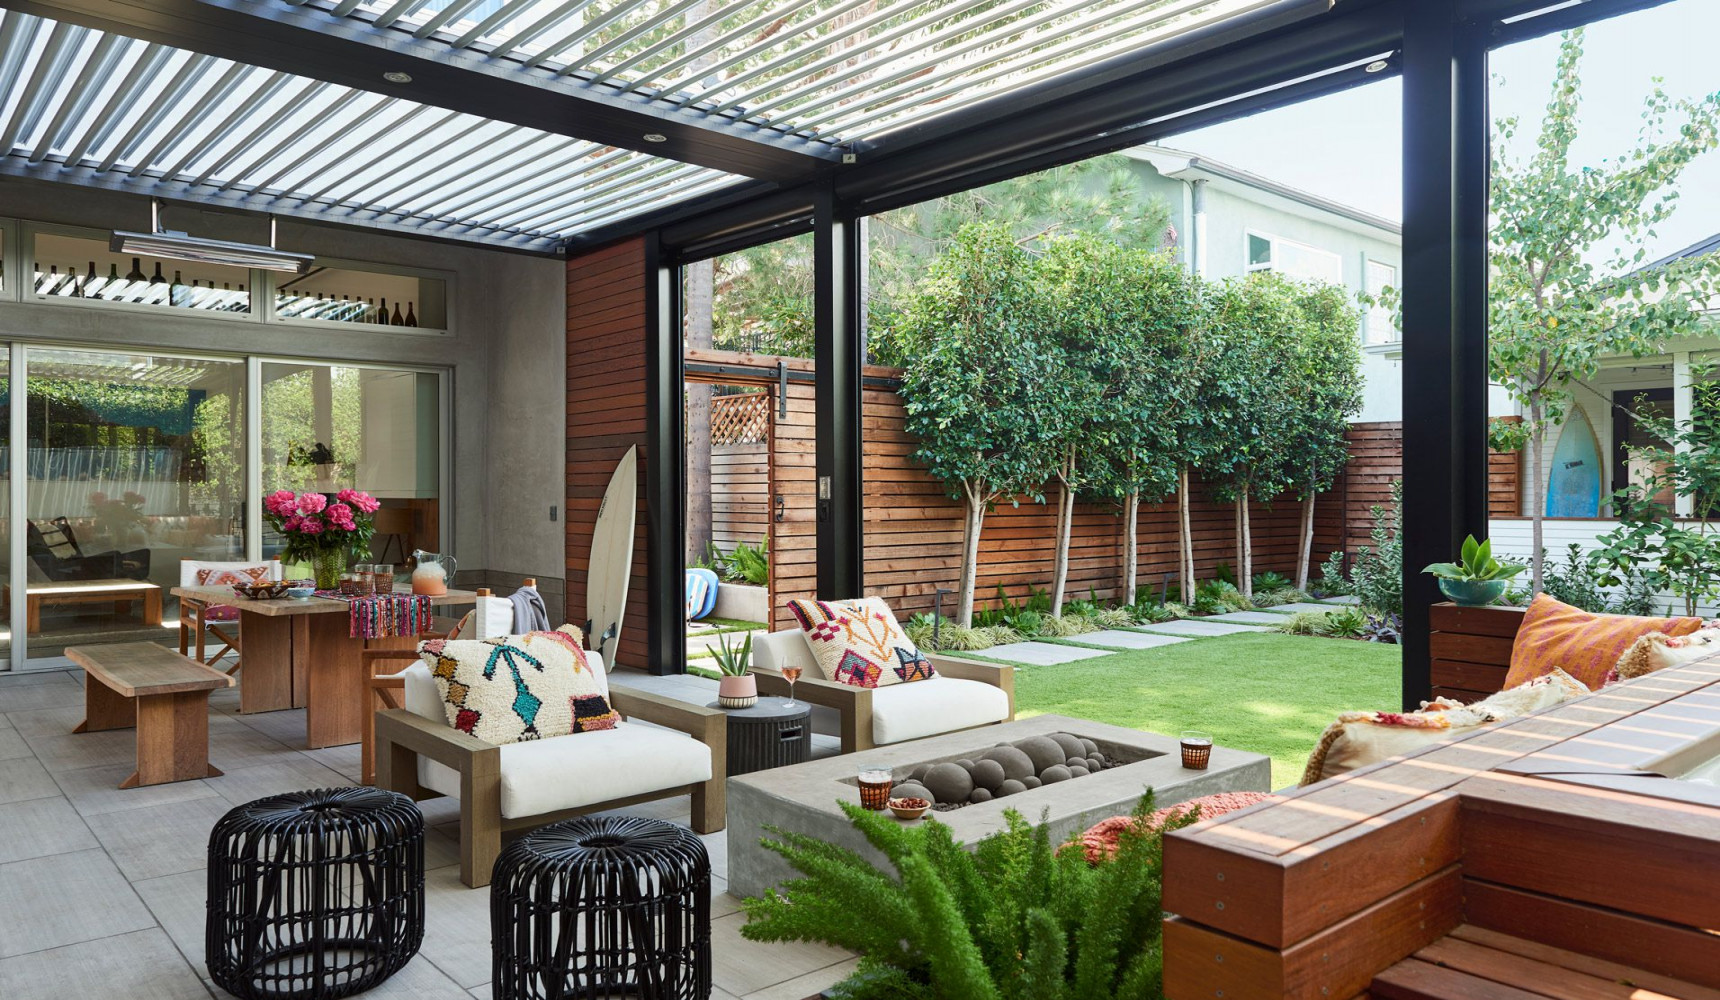 Covered Patio Ideas to Create the Ultimate Outdoor Living Space